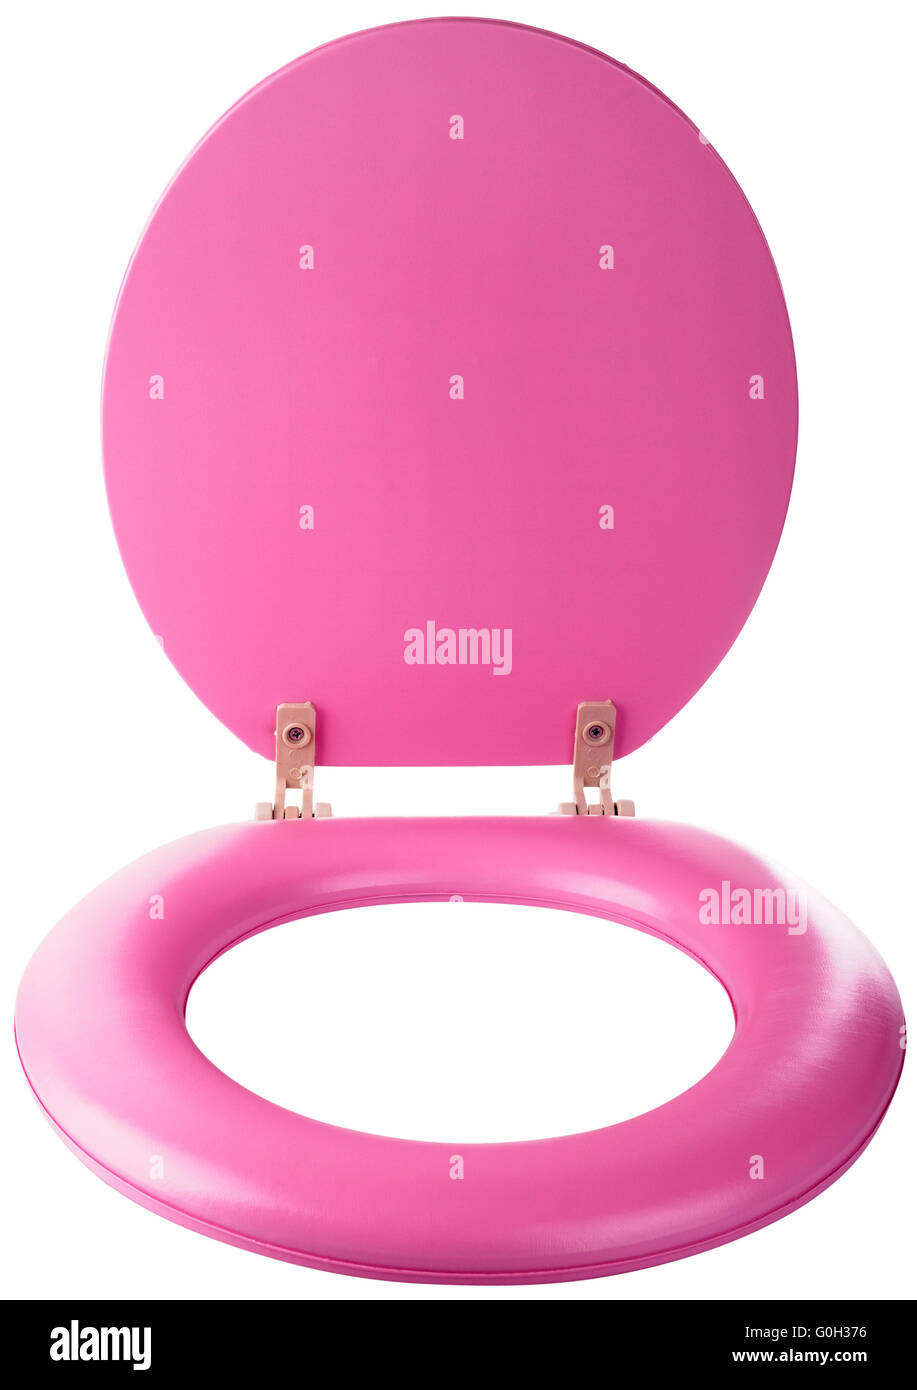 Brand-new pink toilet seat isolated on the white Stock Photo